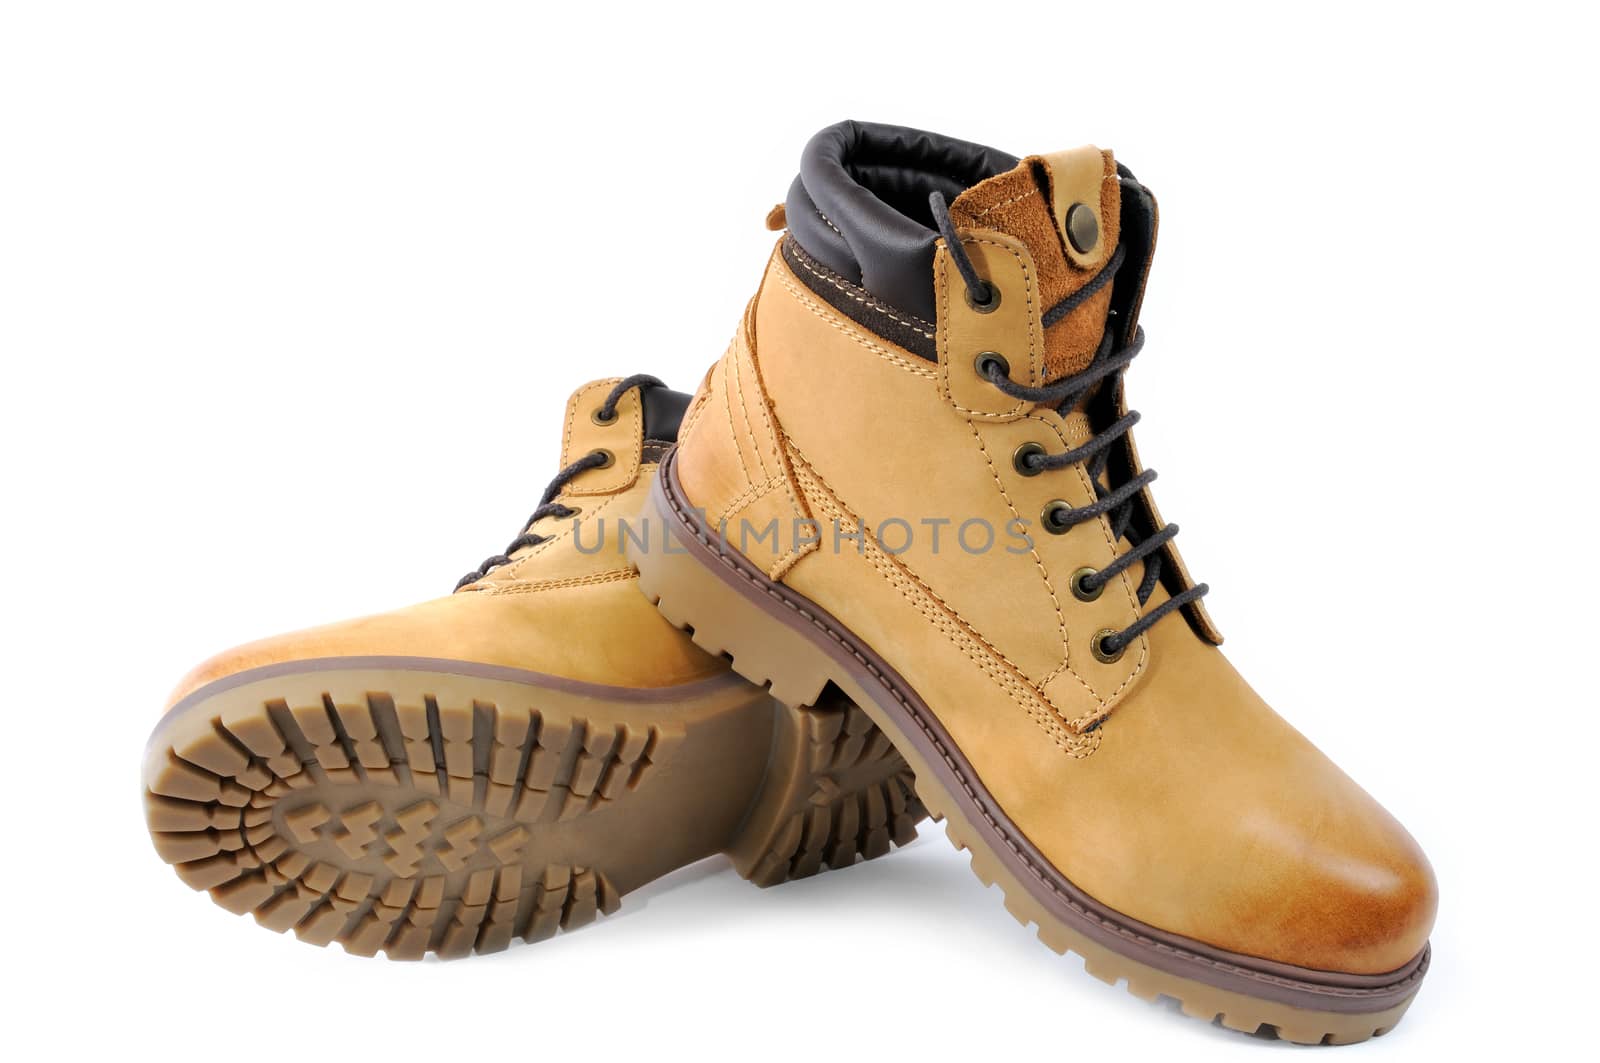 High shoes men's leather light on white background.